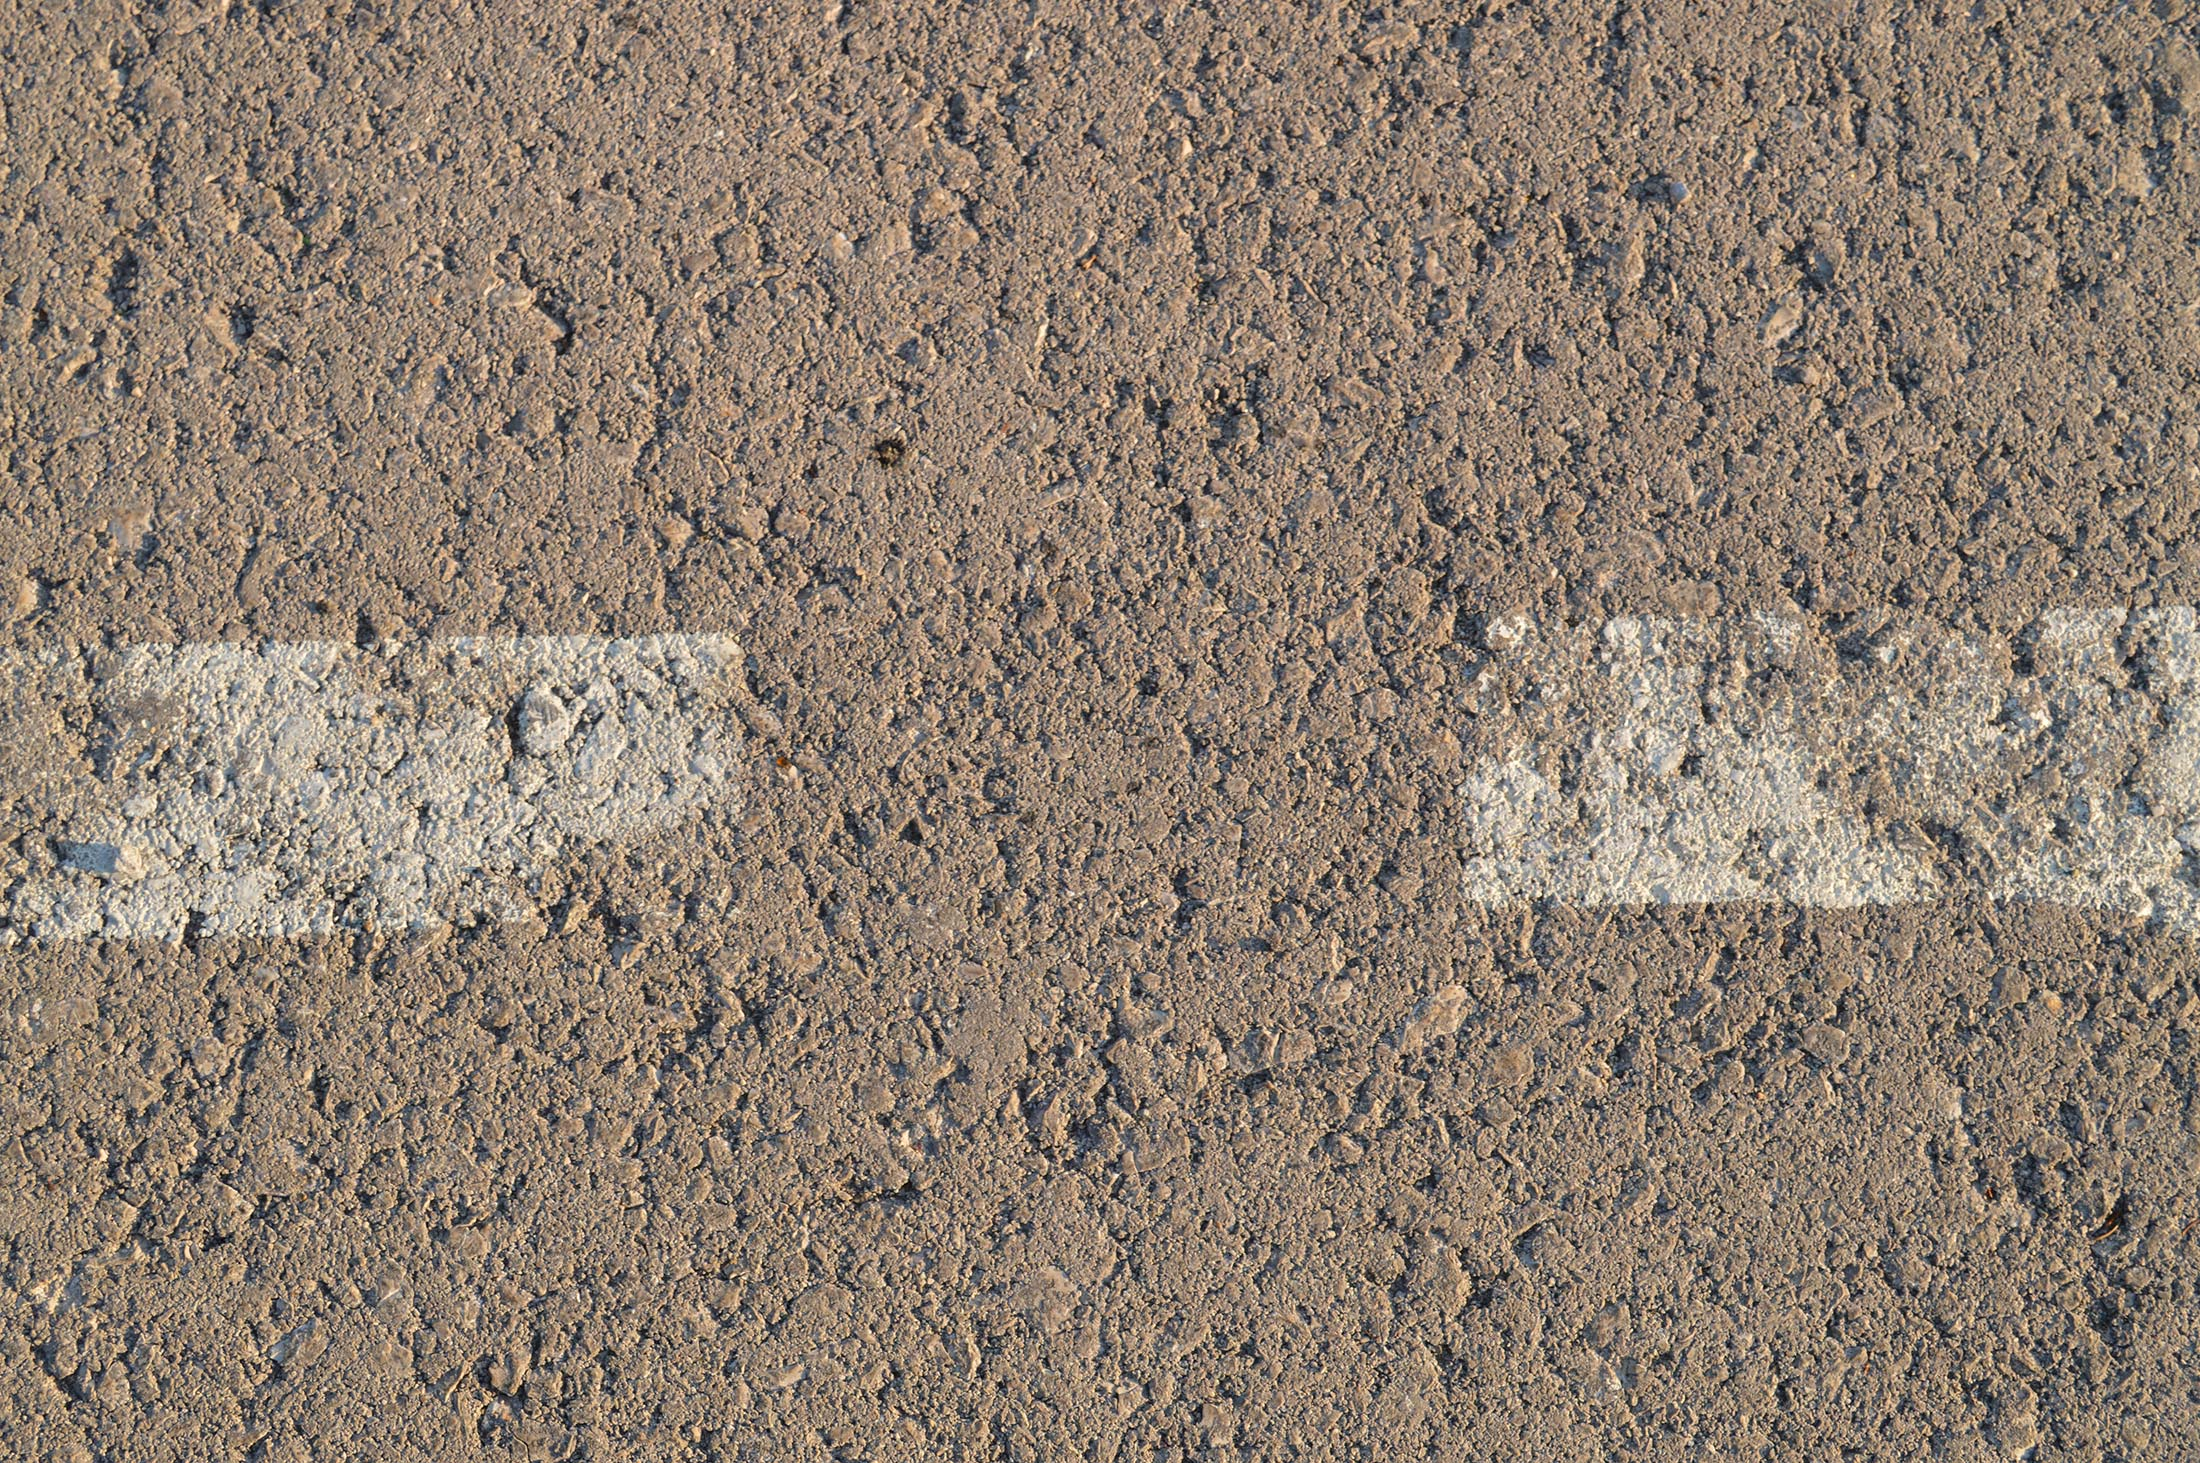 Asphalt with two white lines by Mish-A-Man